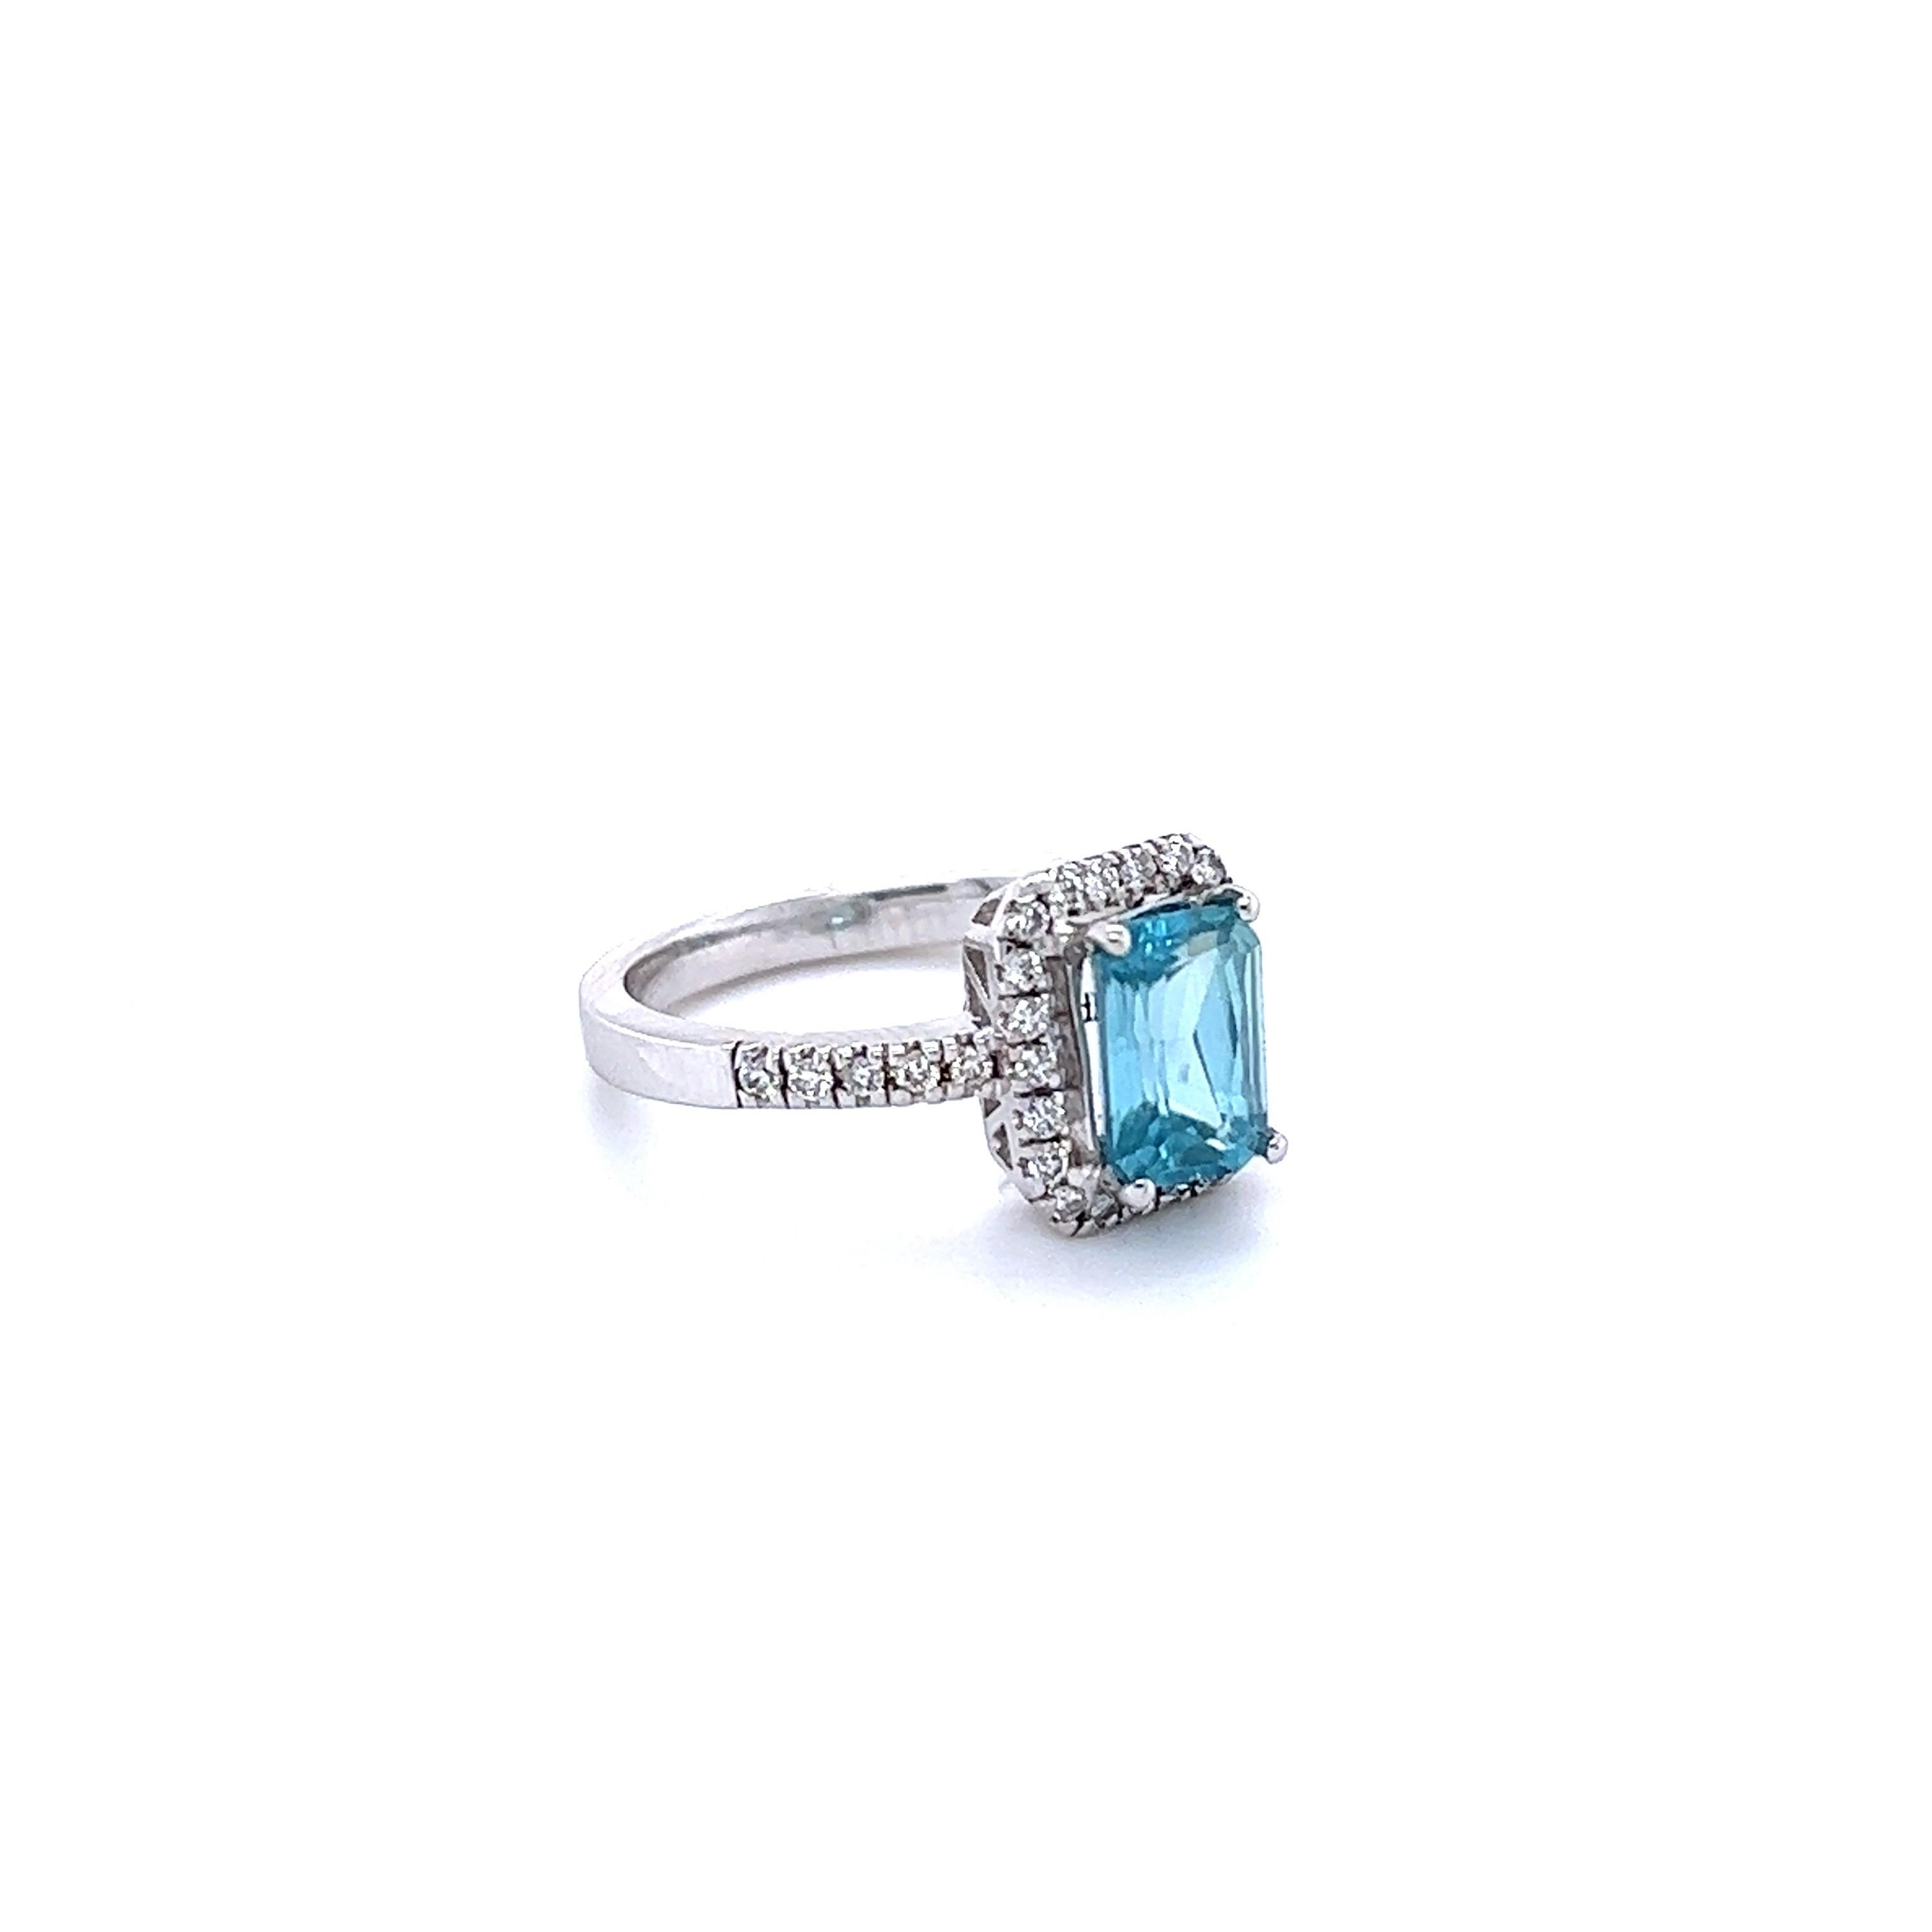 Blue Zircon is a natural stone mined mainly in Sri Lanka, Myanmar, and Australia.  
This ring has a Emerald Cut Blue Zircon that weighs 2.41 carats and is surrounded by 32 Round Cut Diamonds that weigh 0.32 Carats. The total carat weight of the ring